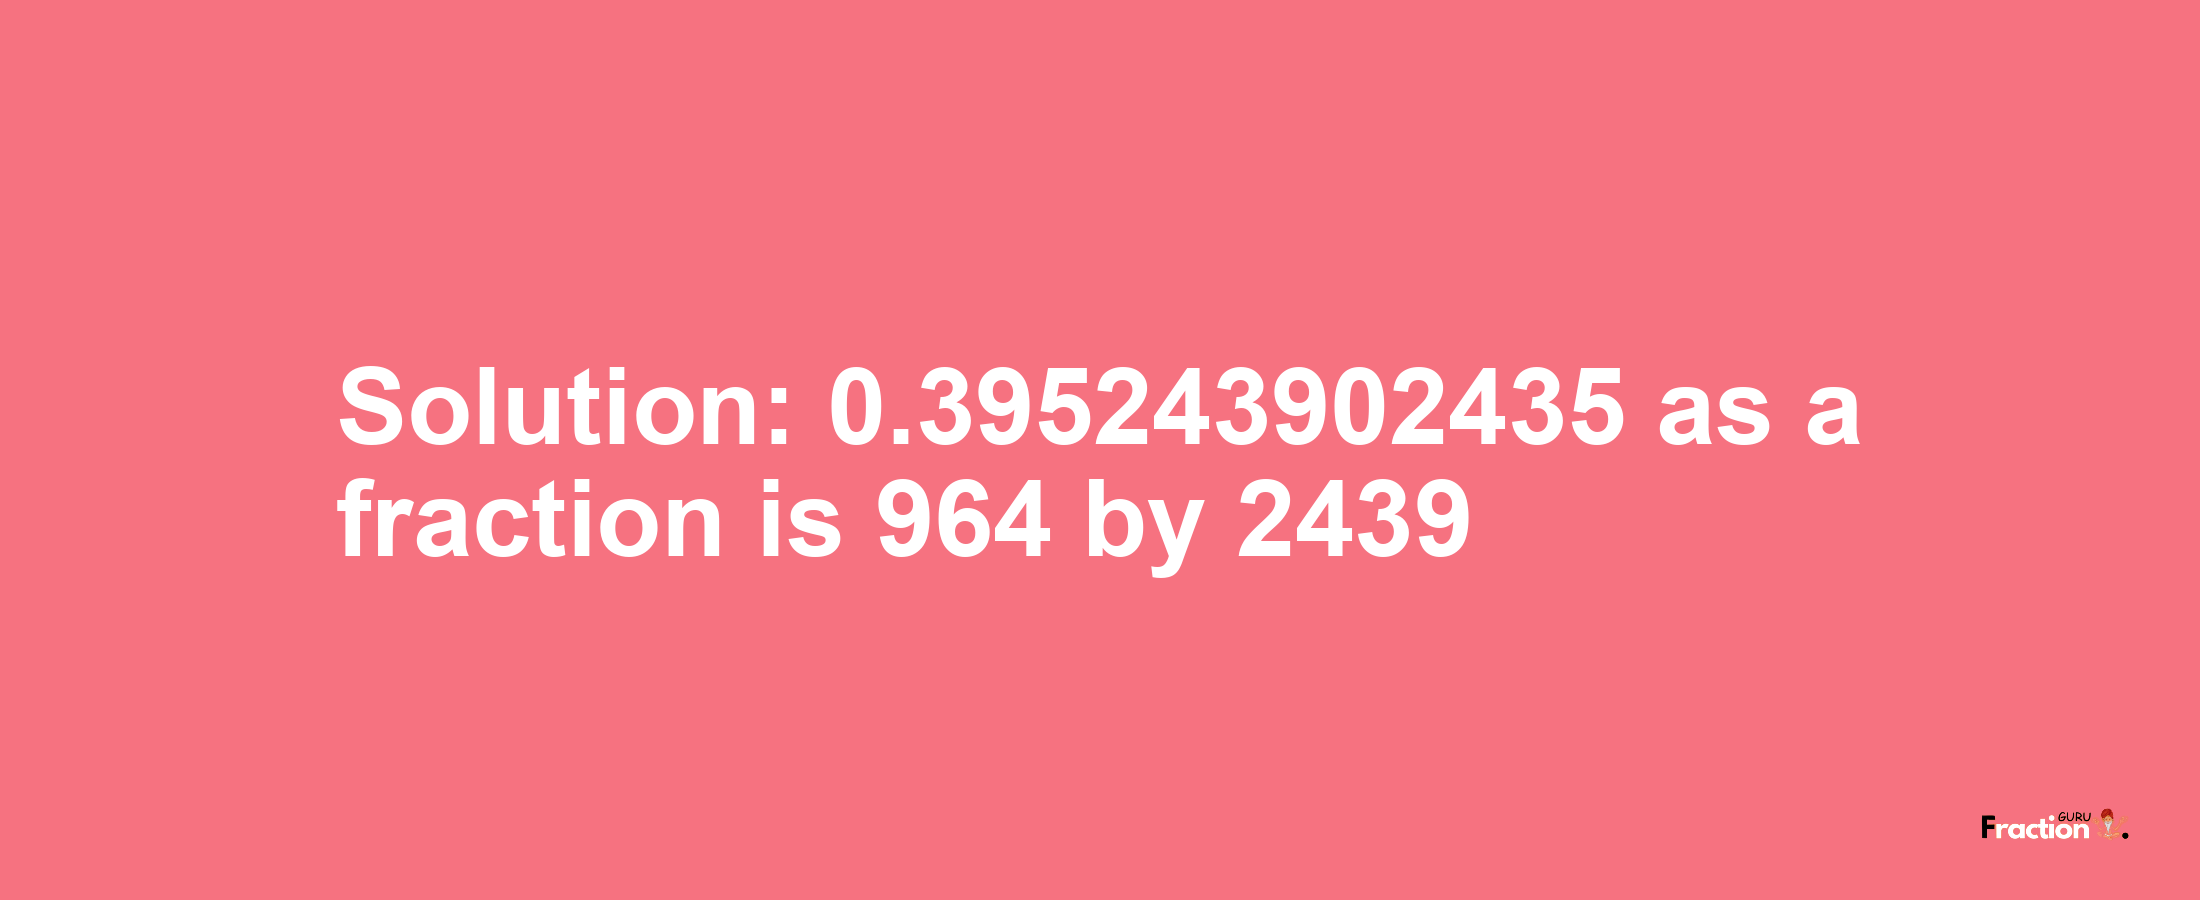 Solution:0.395243902435 as a fraction is 964/2439